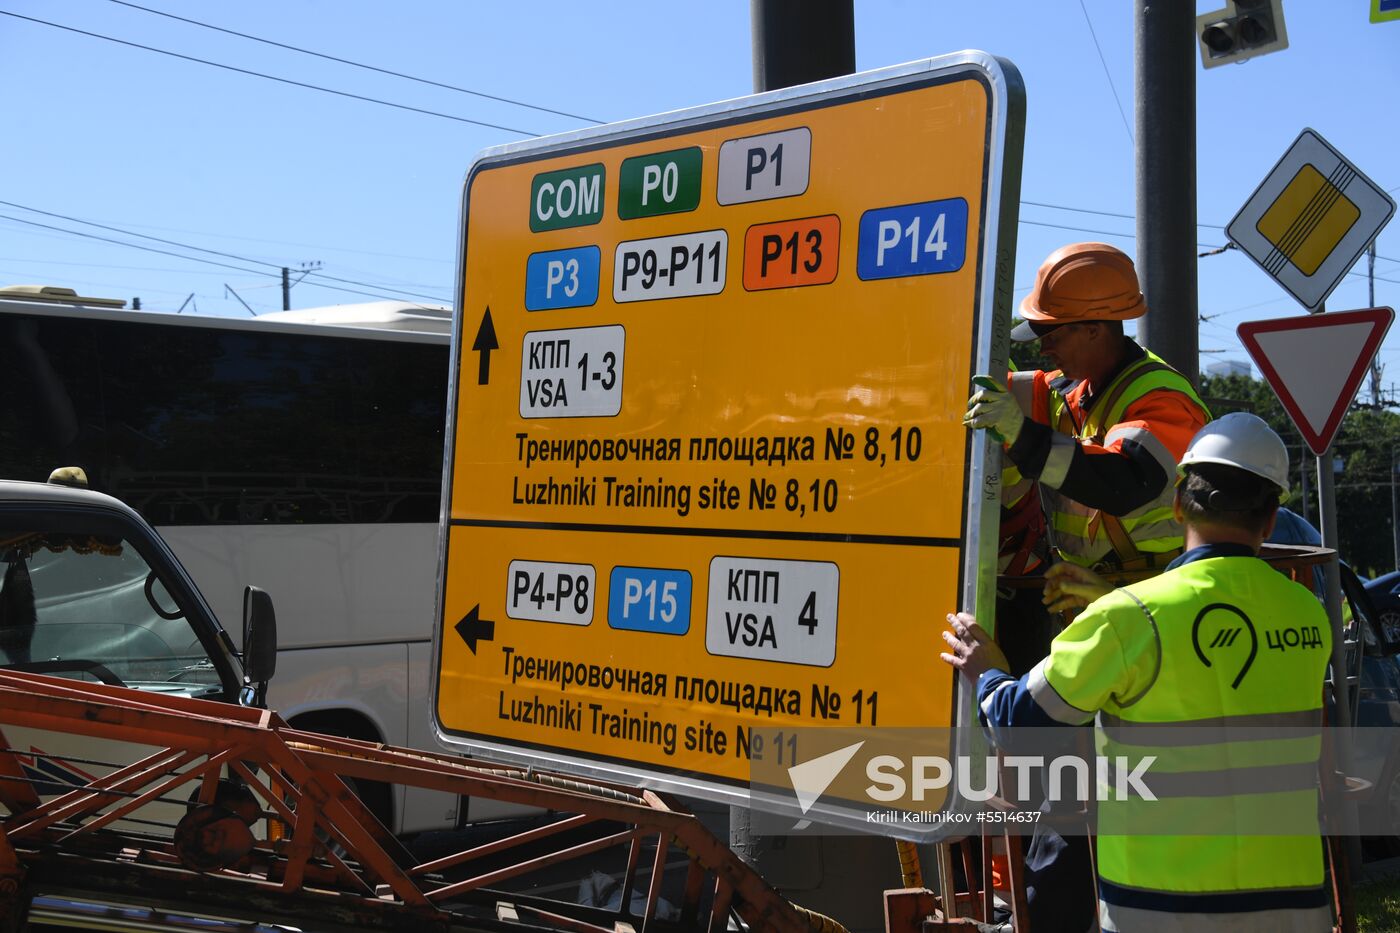 Installing street signs for 2018 FIFA World Cup